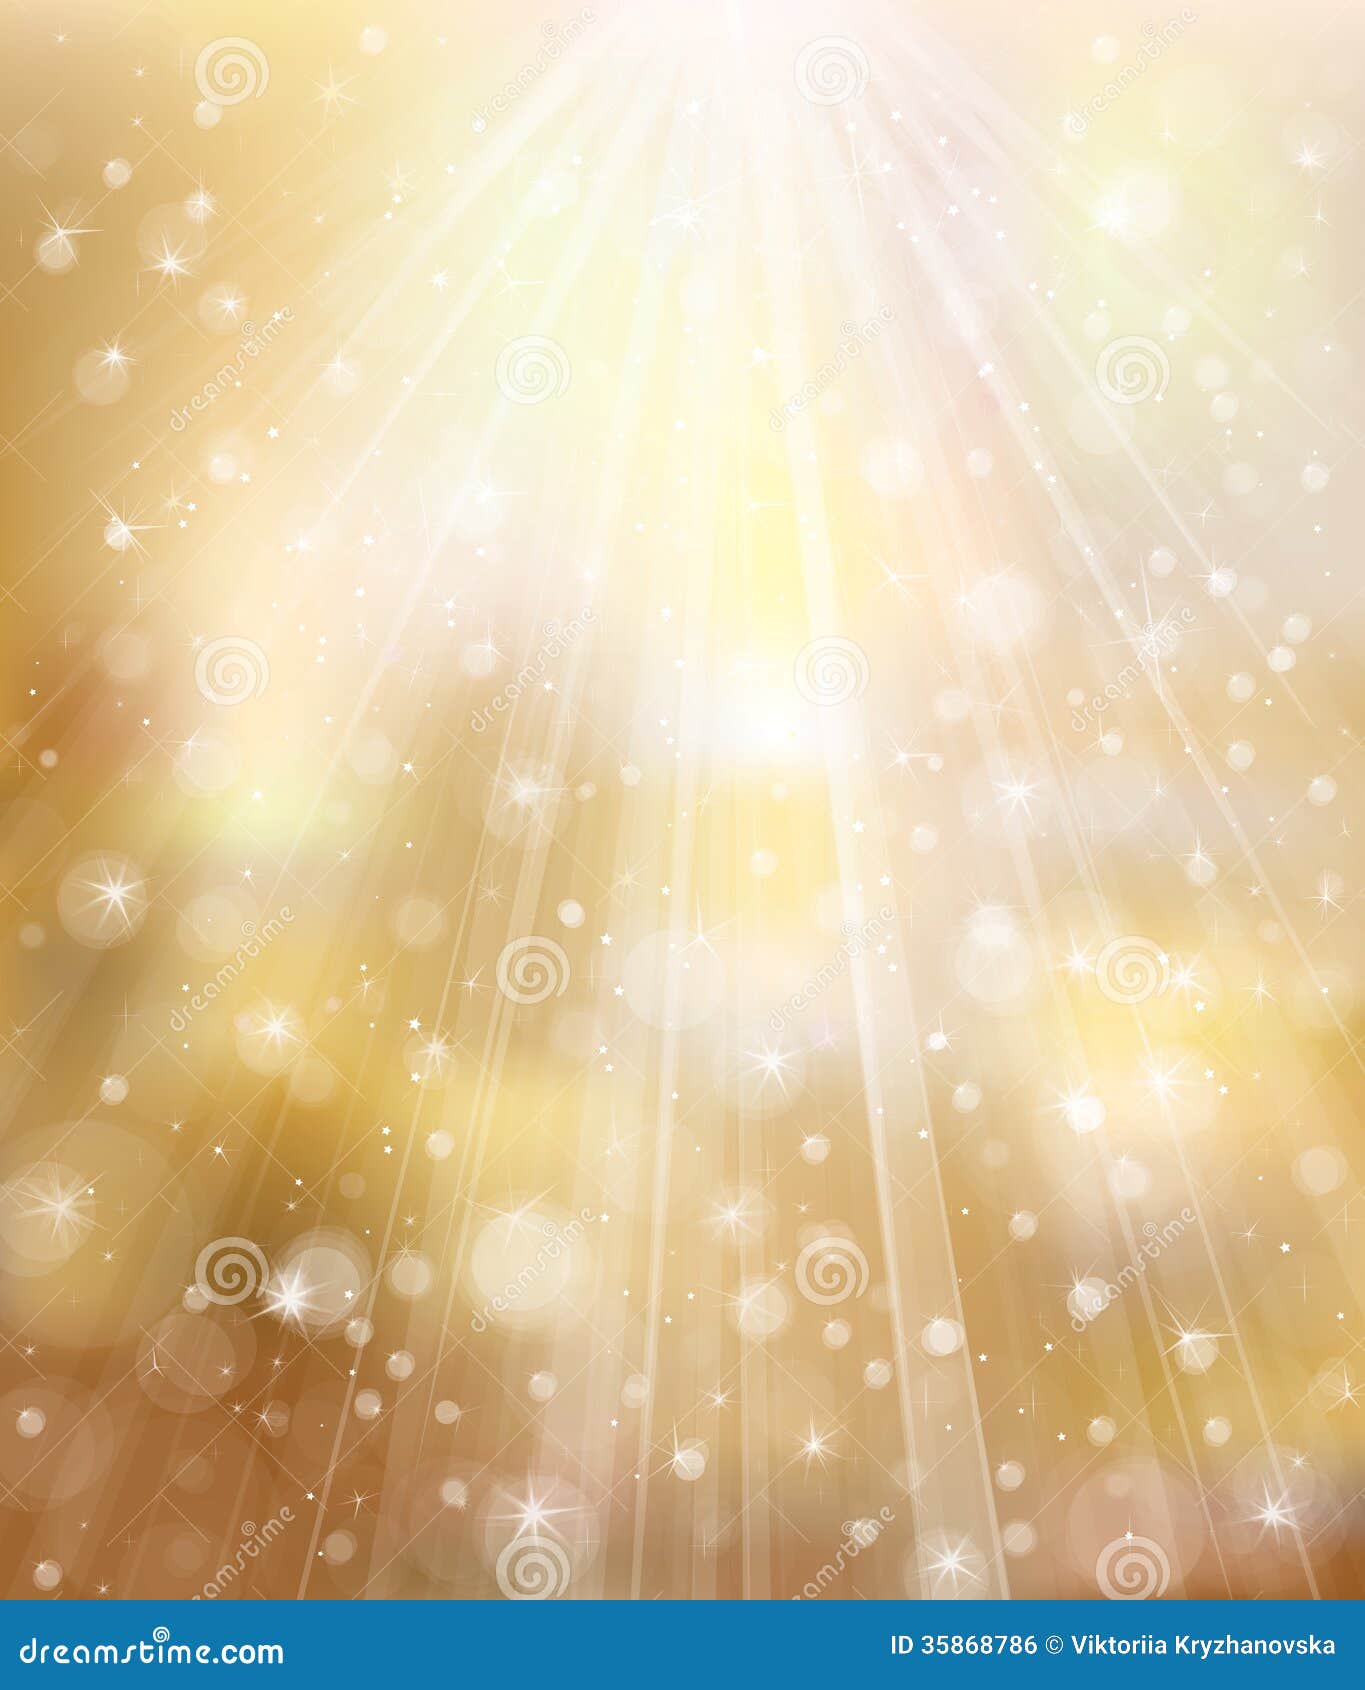 Vector Glitter Golden Background with Rays and Lig Stock Vector ...